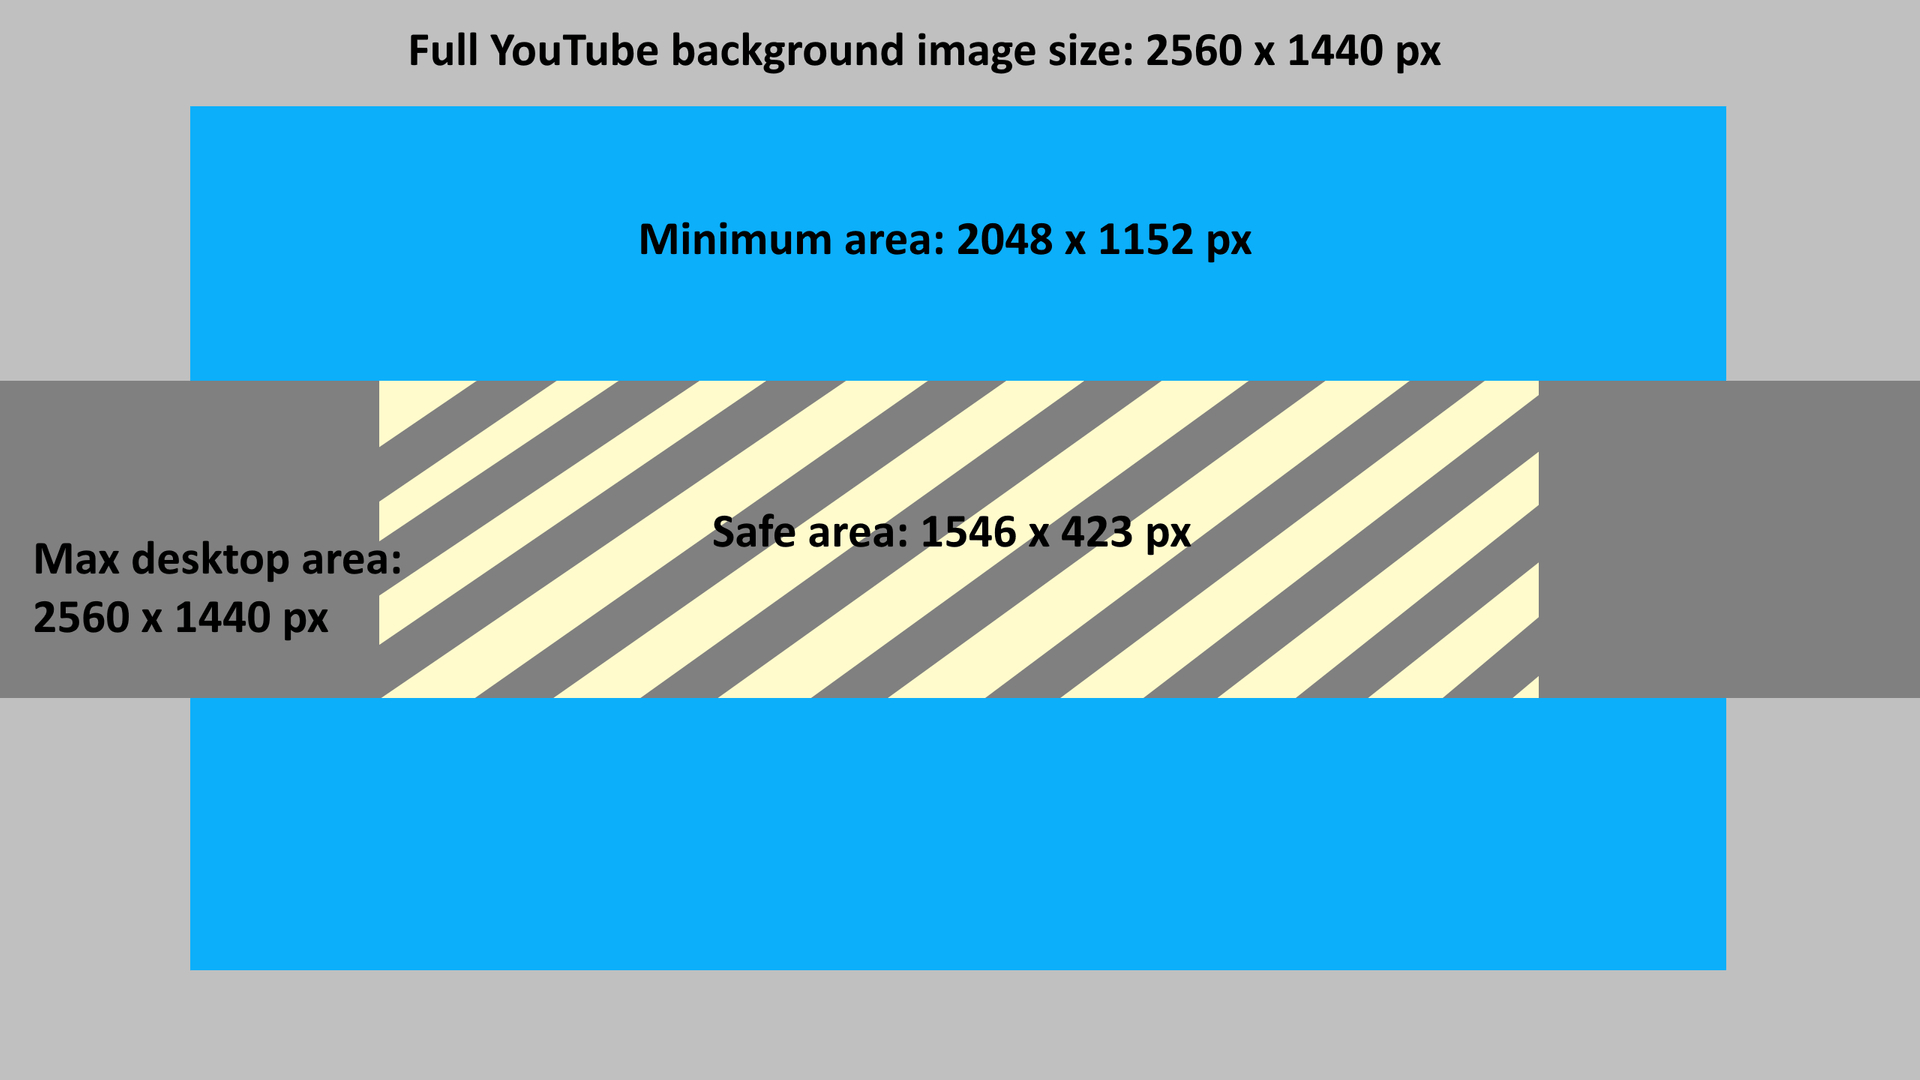 The Best Youtube Banner Size In 2019 + Best Practices For Regarding Youtube Banner Template Size